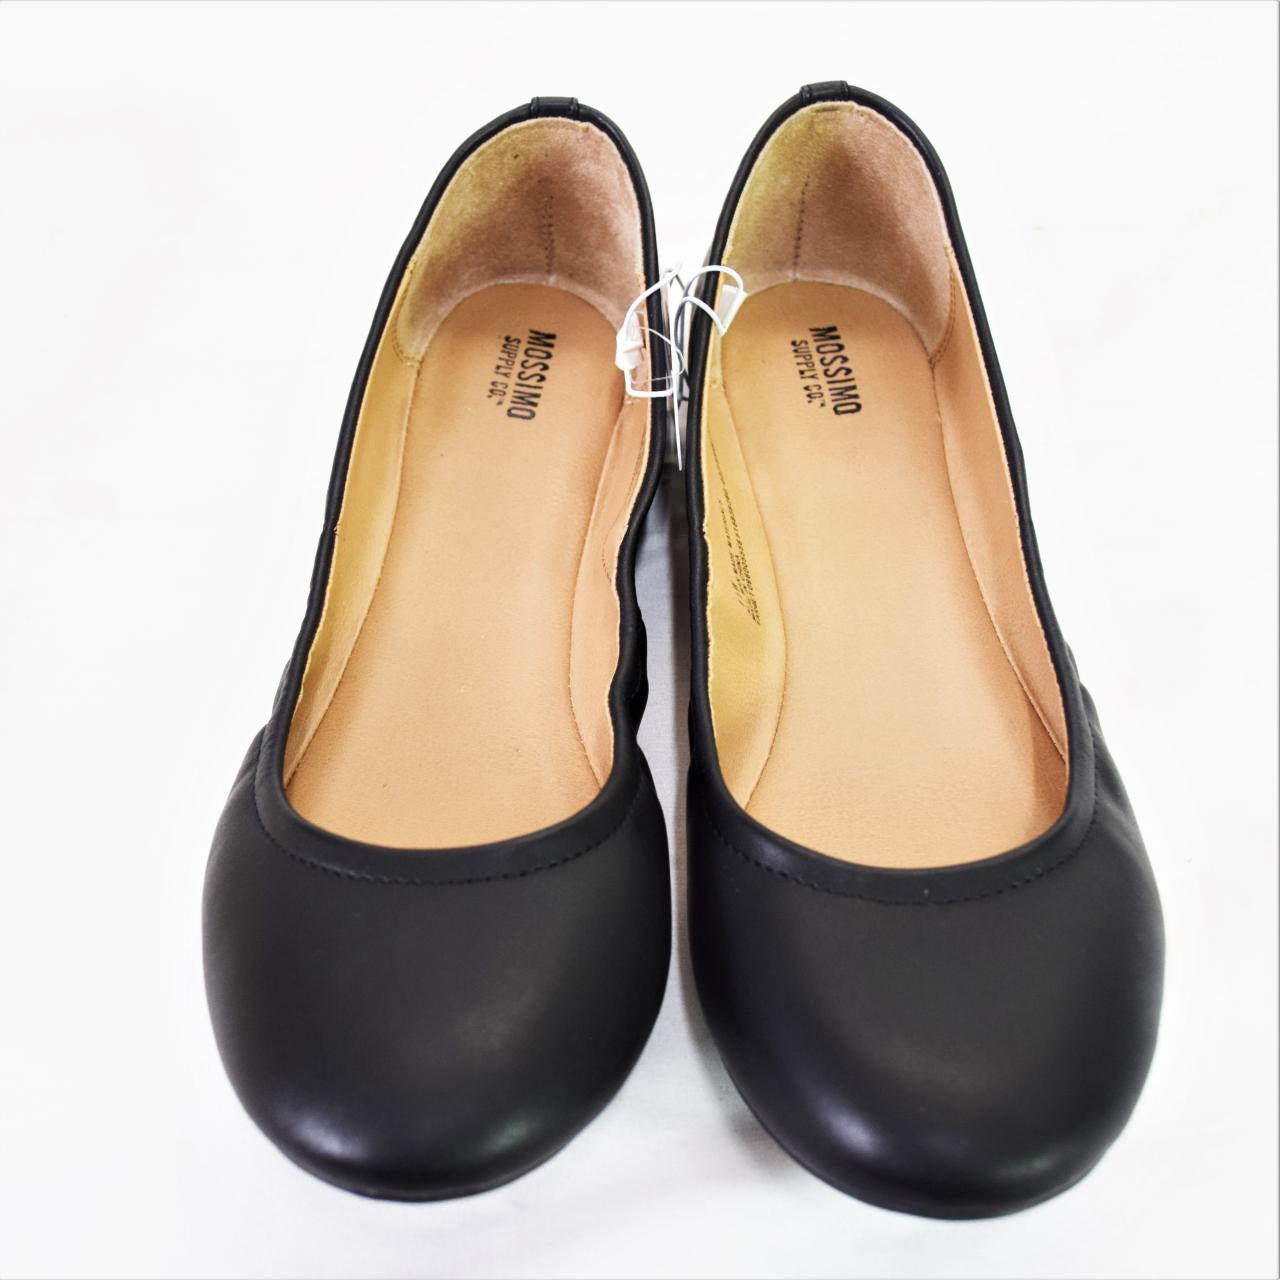 Mossimo Supply Co., Shoes, 325 Mossimo Brand Size 85 Ladies Flats Guc